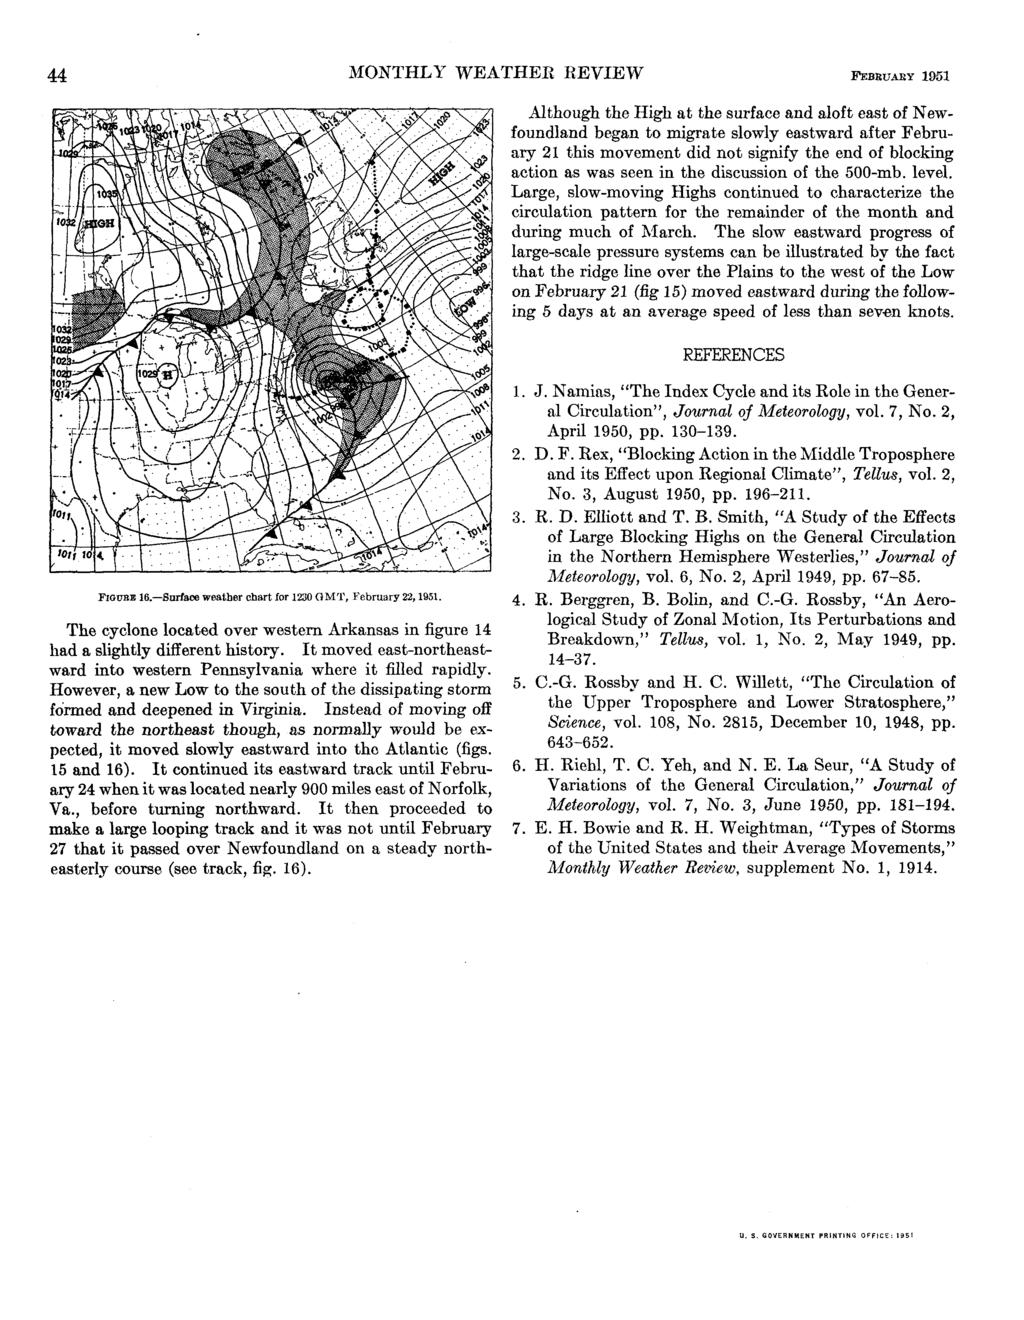 44 MONTHLY WEATHER REVIEW FEBRUARY 1951 Although the High at the surface and aloft east of Newfoundland began to migrate slowly eastward after February 21 this movement did not signify the end of